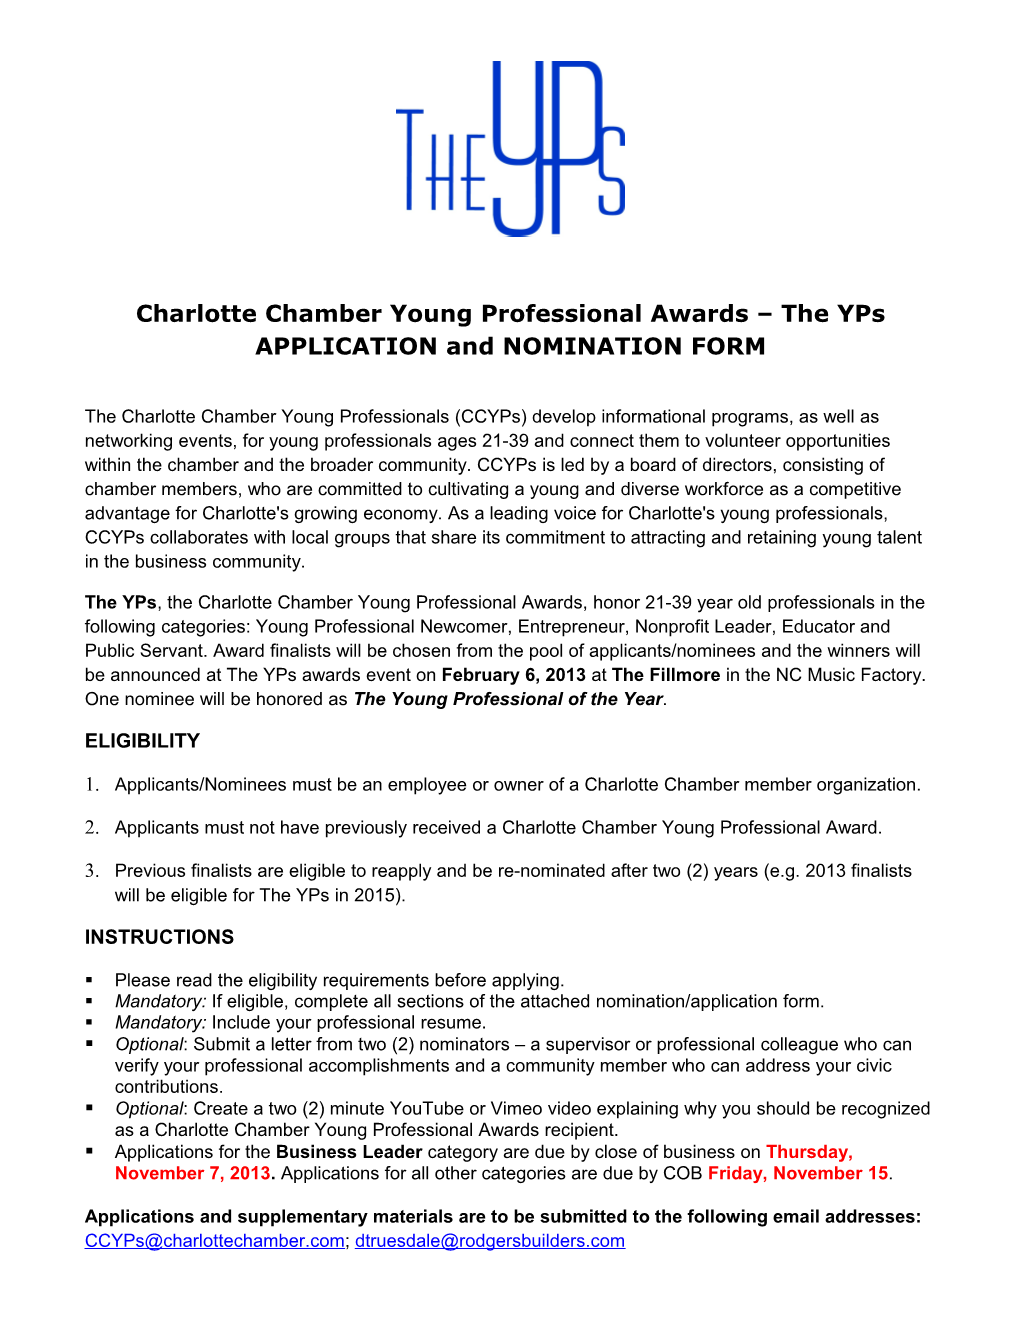 Charlotte Chamber Young Professional Awards the Yps APPLICATION and NOMINATION FORM